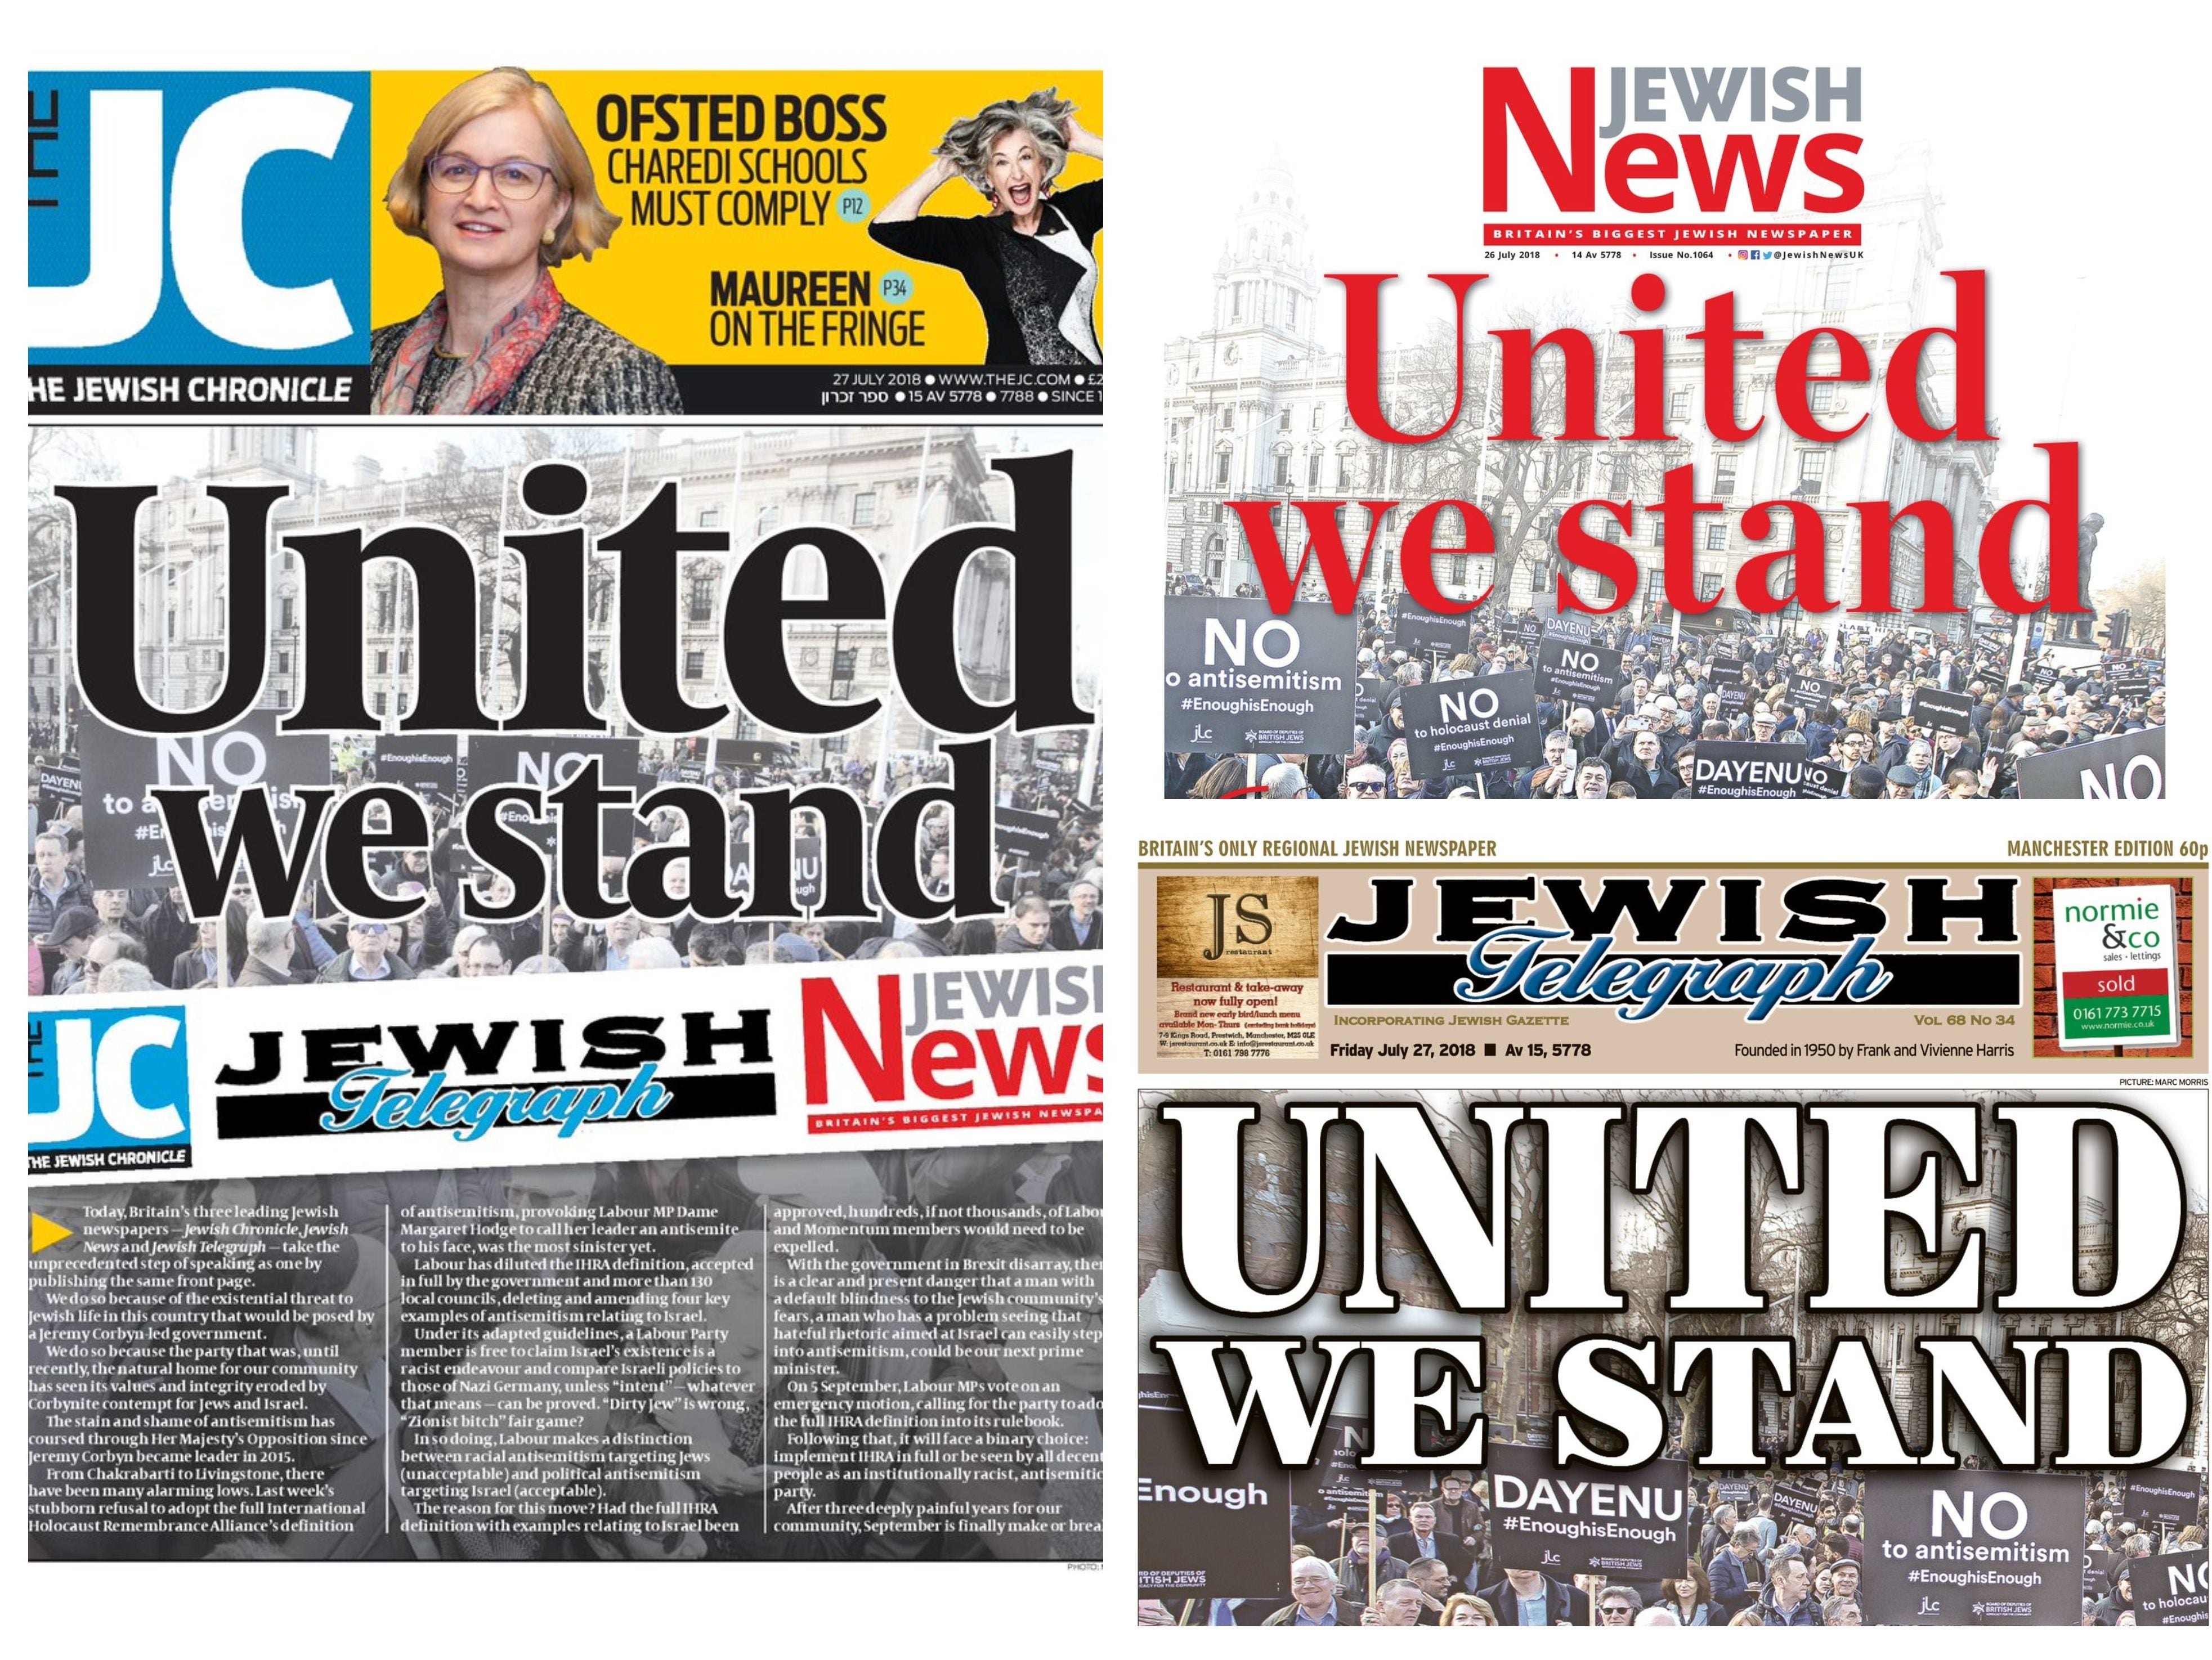 Rival Jewish newspapers unite in 'unprecedented' front page collaboration claiming Labour Party under Corbyn poses 'threat to Jewish life'